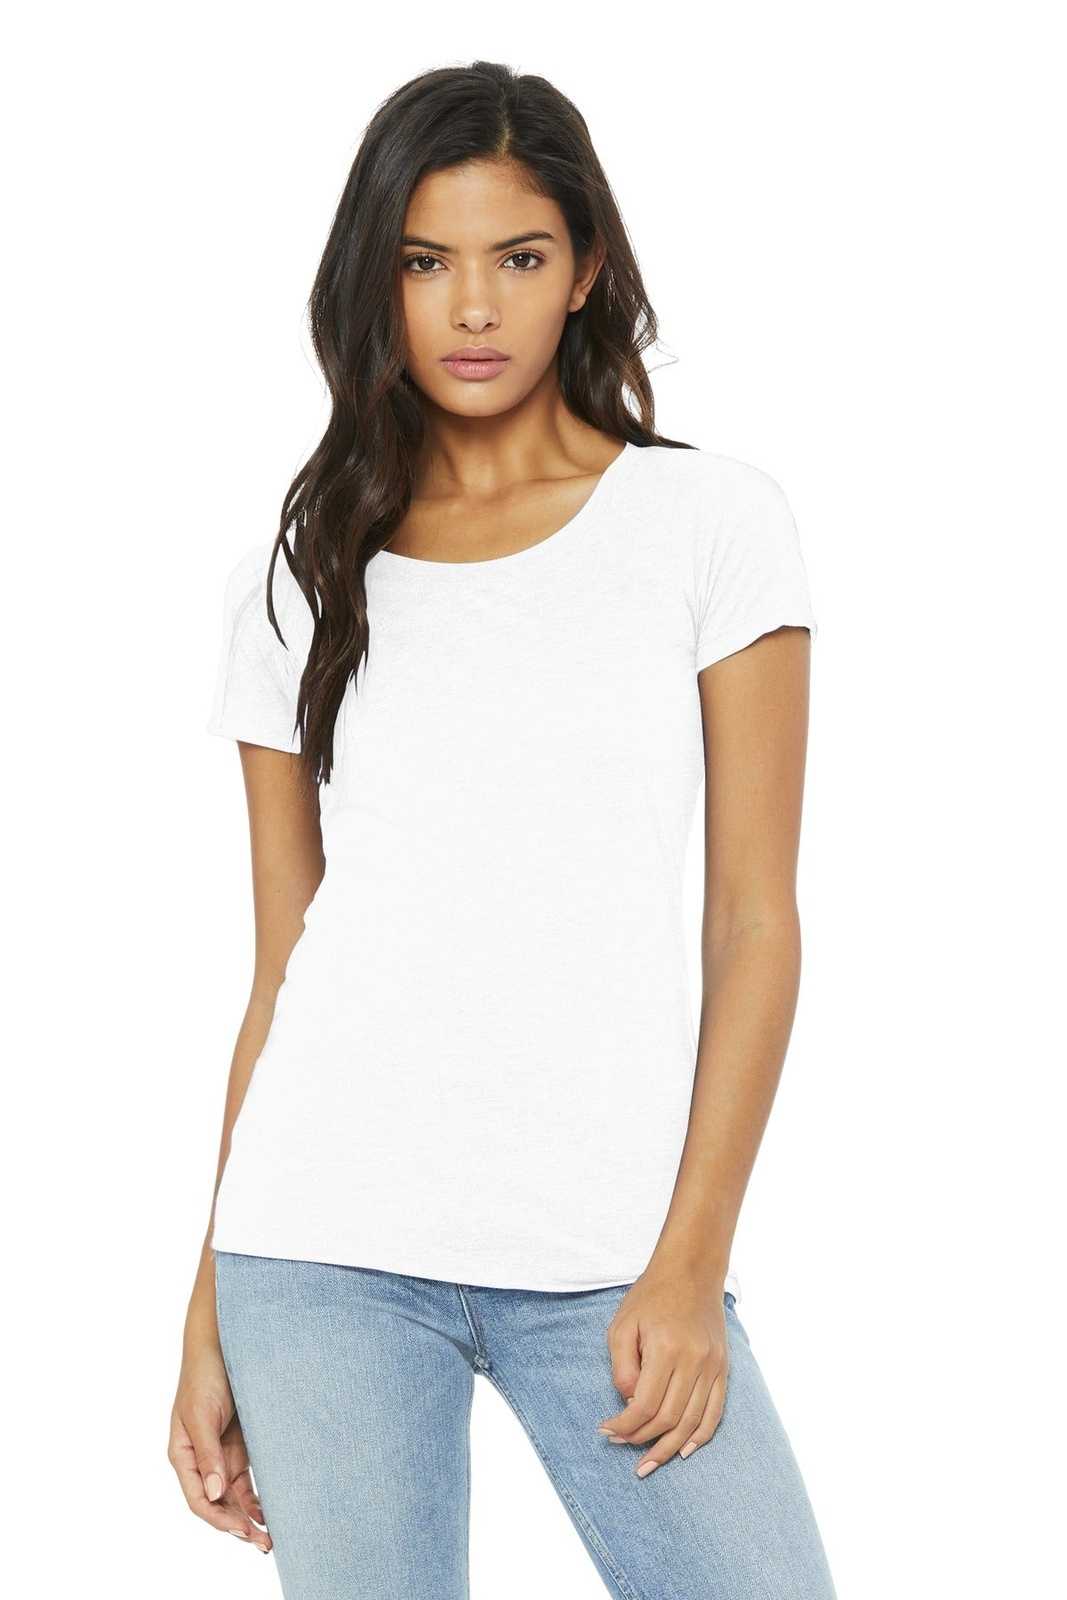 Bella + Canvas 8413 Women's Triblend Short Sleeve Tee - Solid White Triblend - HIT a Double